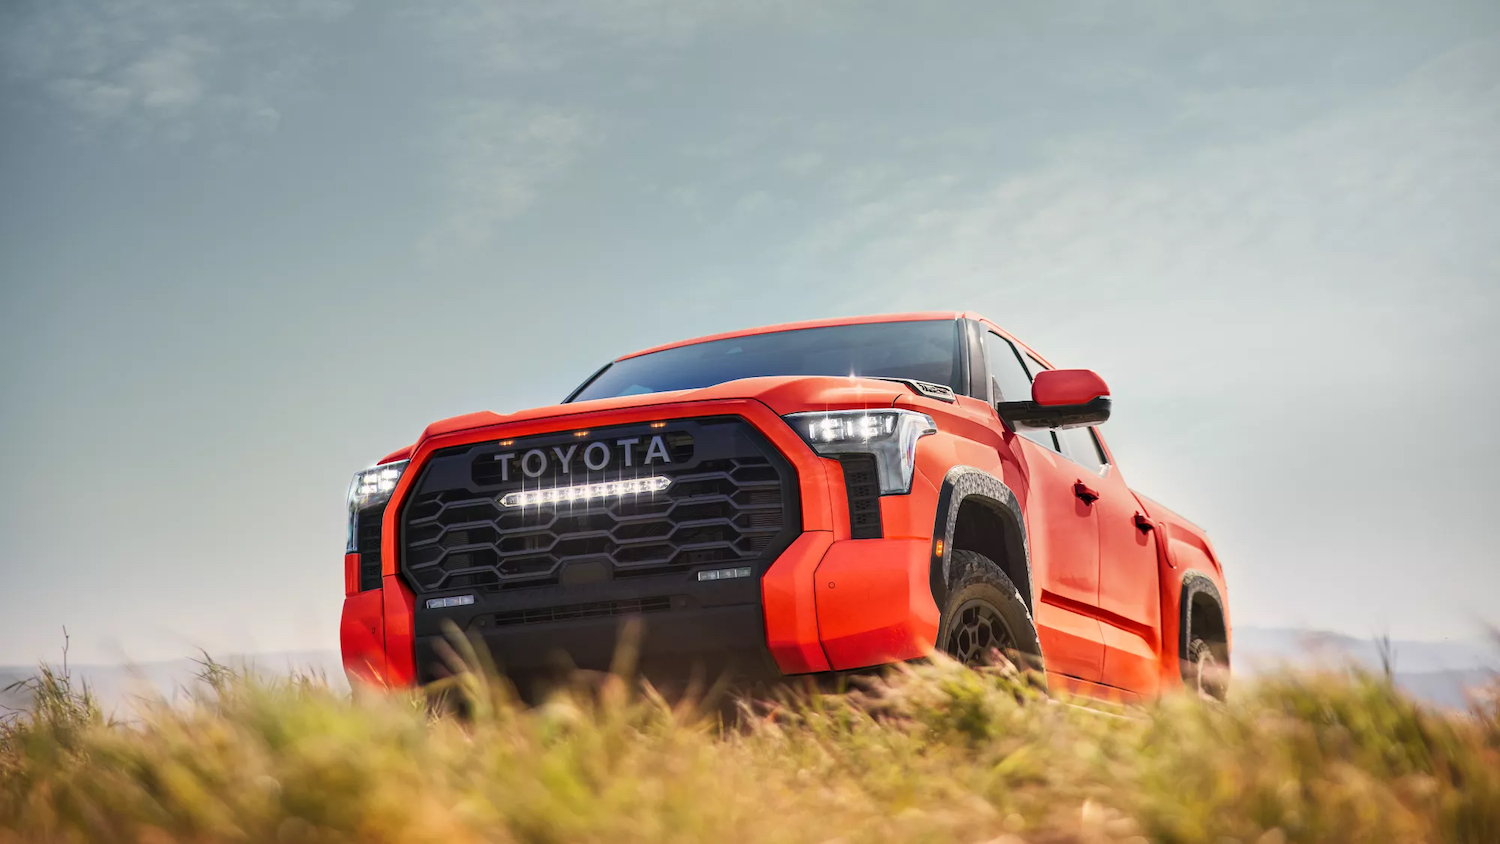 This is the 2022 Toyota Tundra TRD Pro hybrid truck 4x4 off road | Toyota